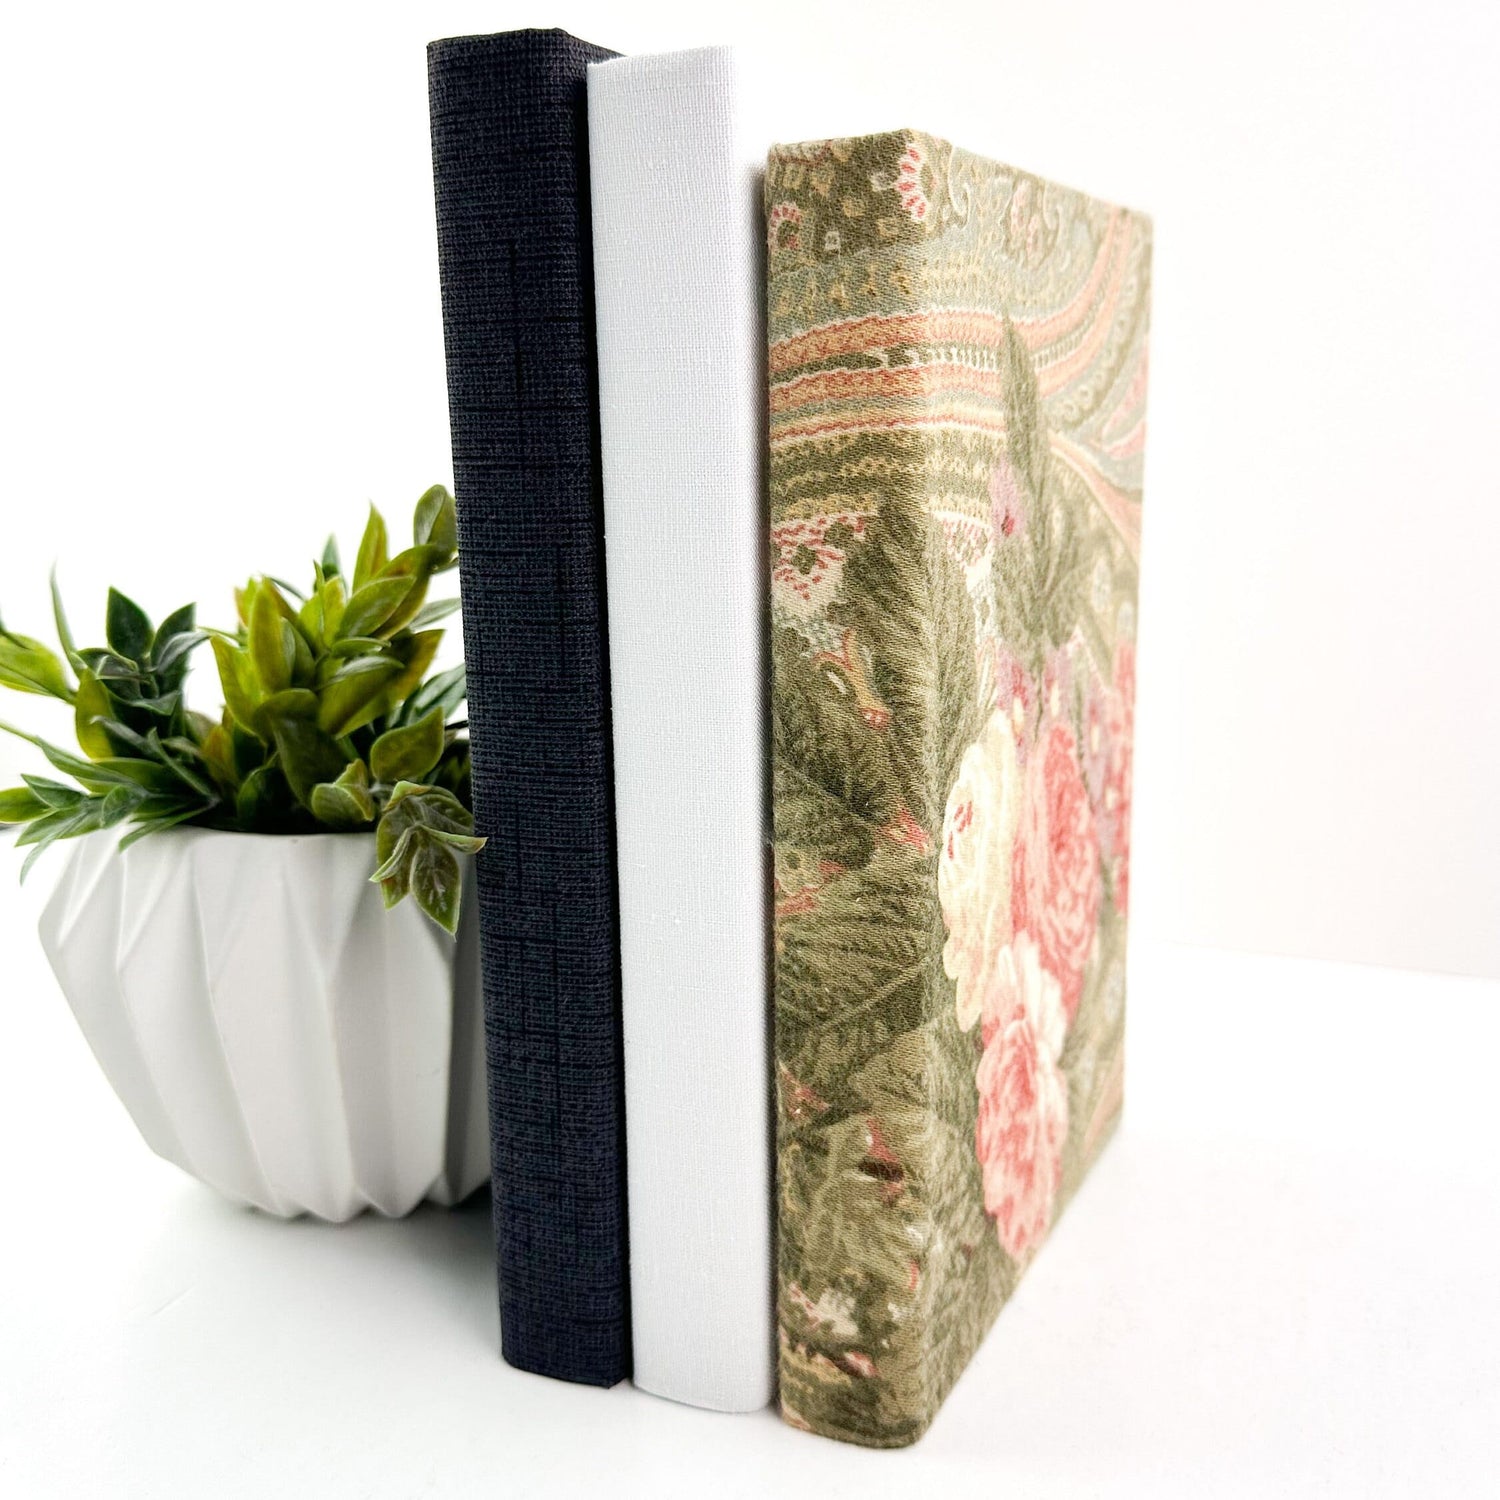 Fabric covered books for home decor.